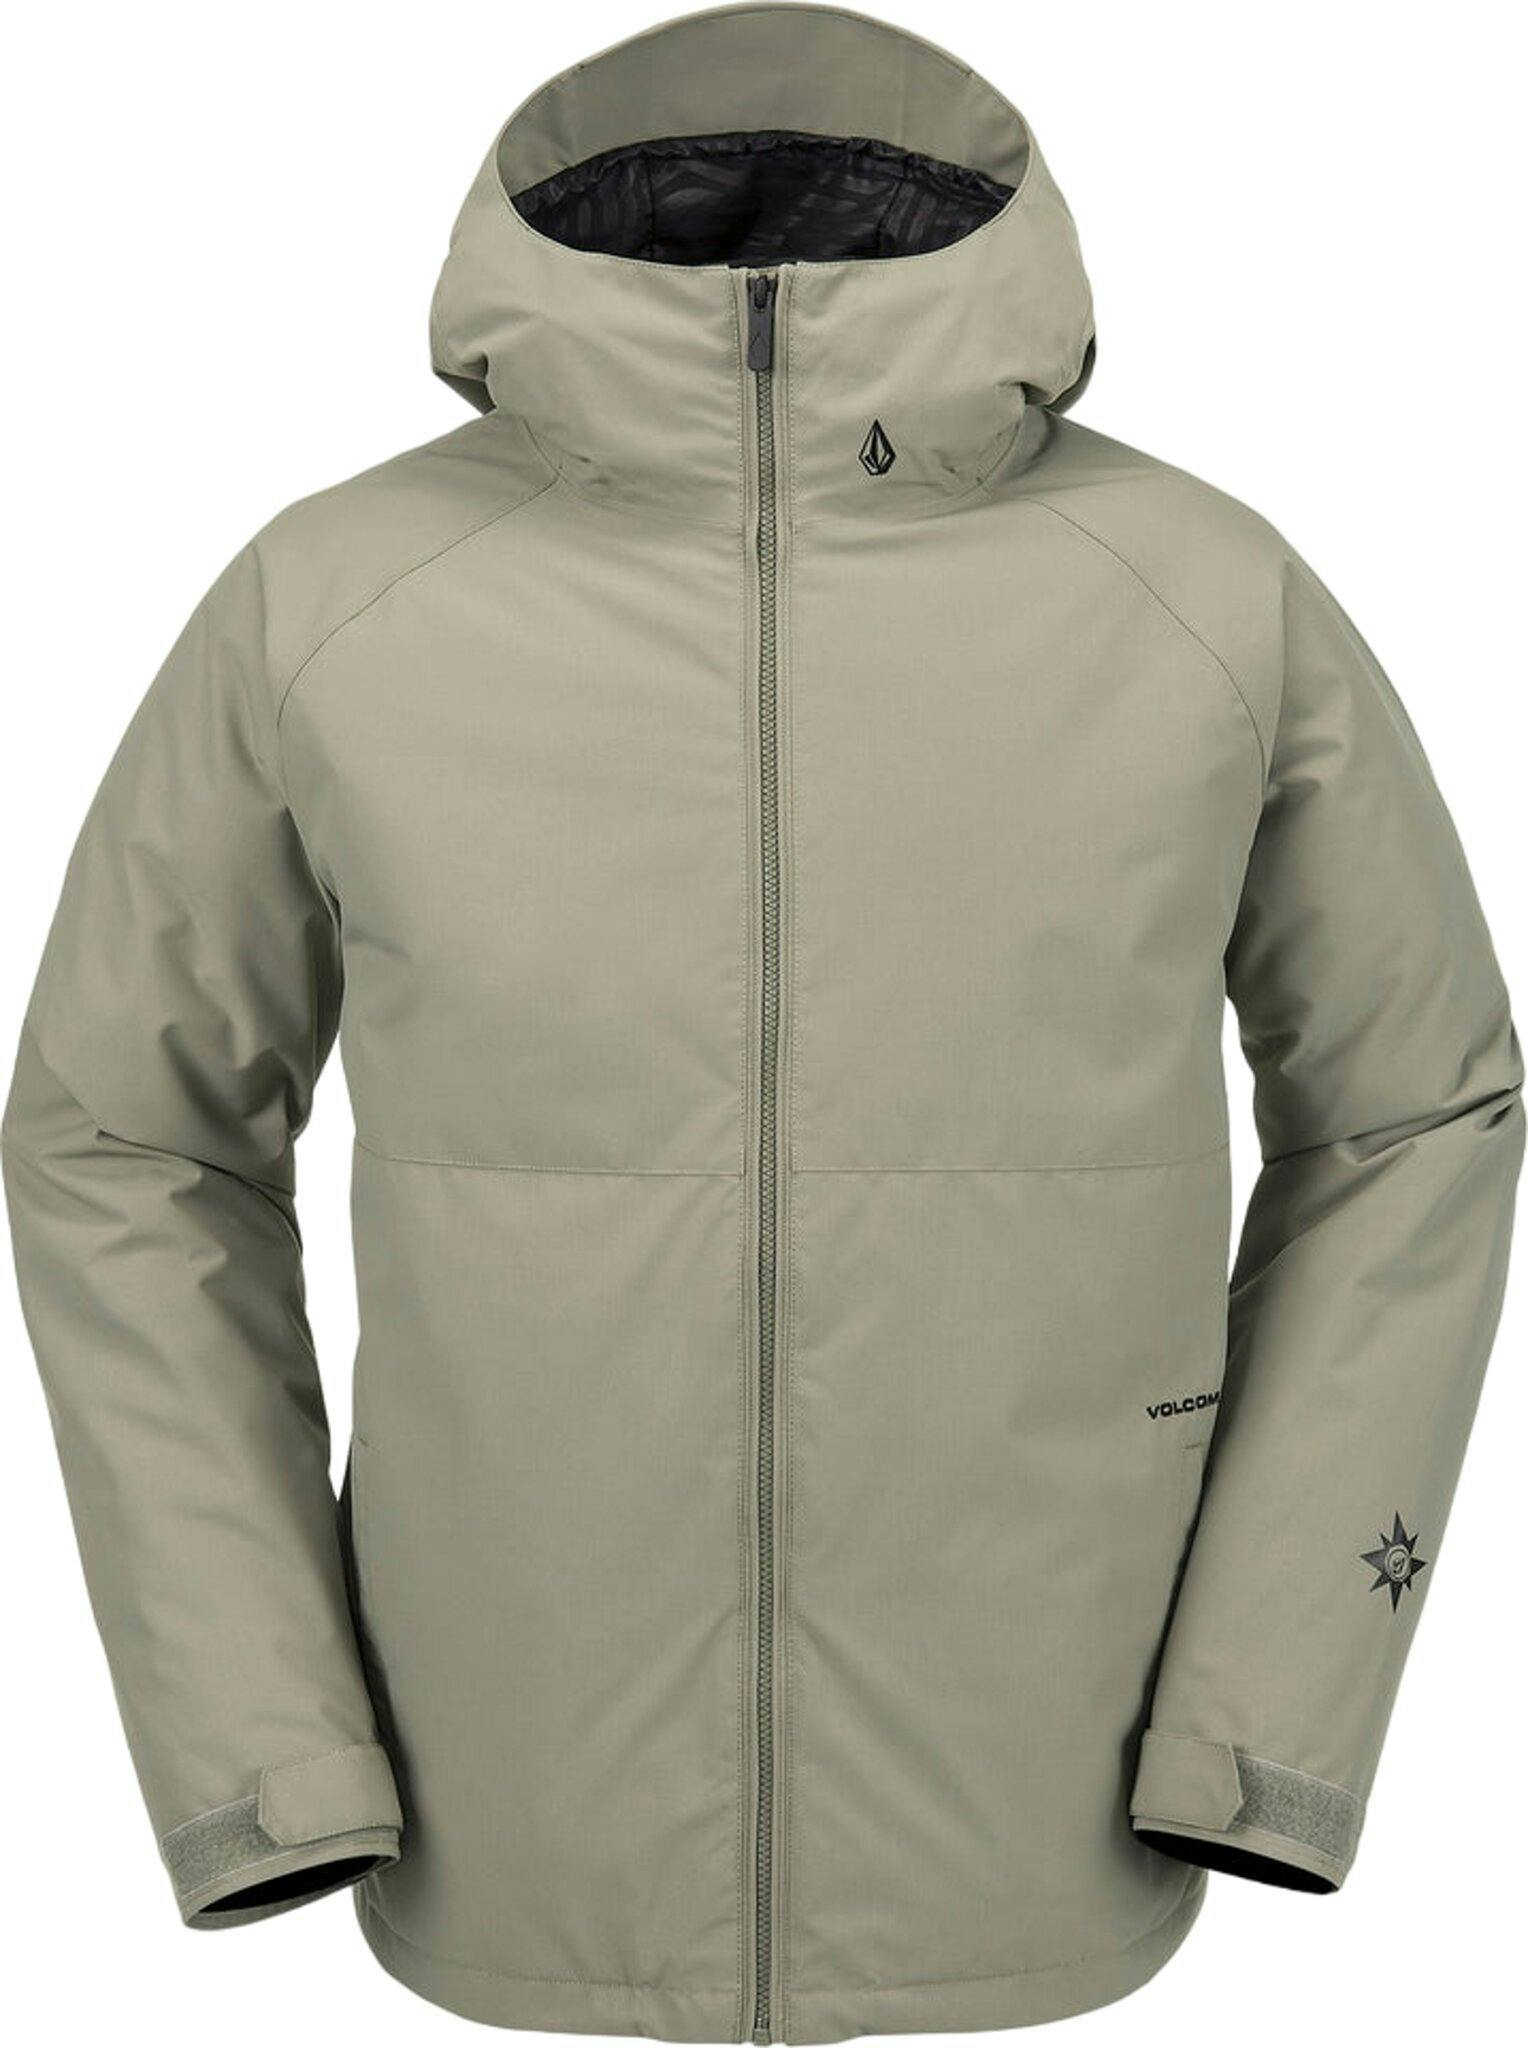 Product image for 2836 Insulated Jacket - Men's